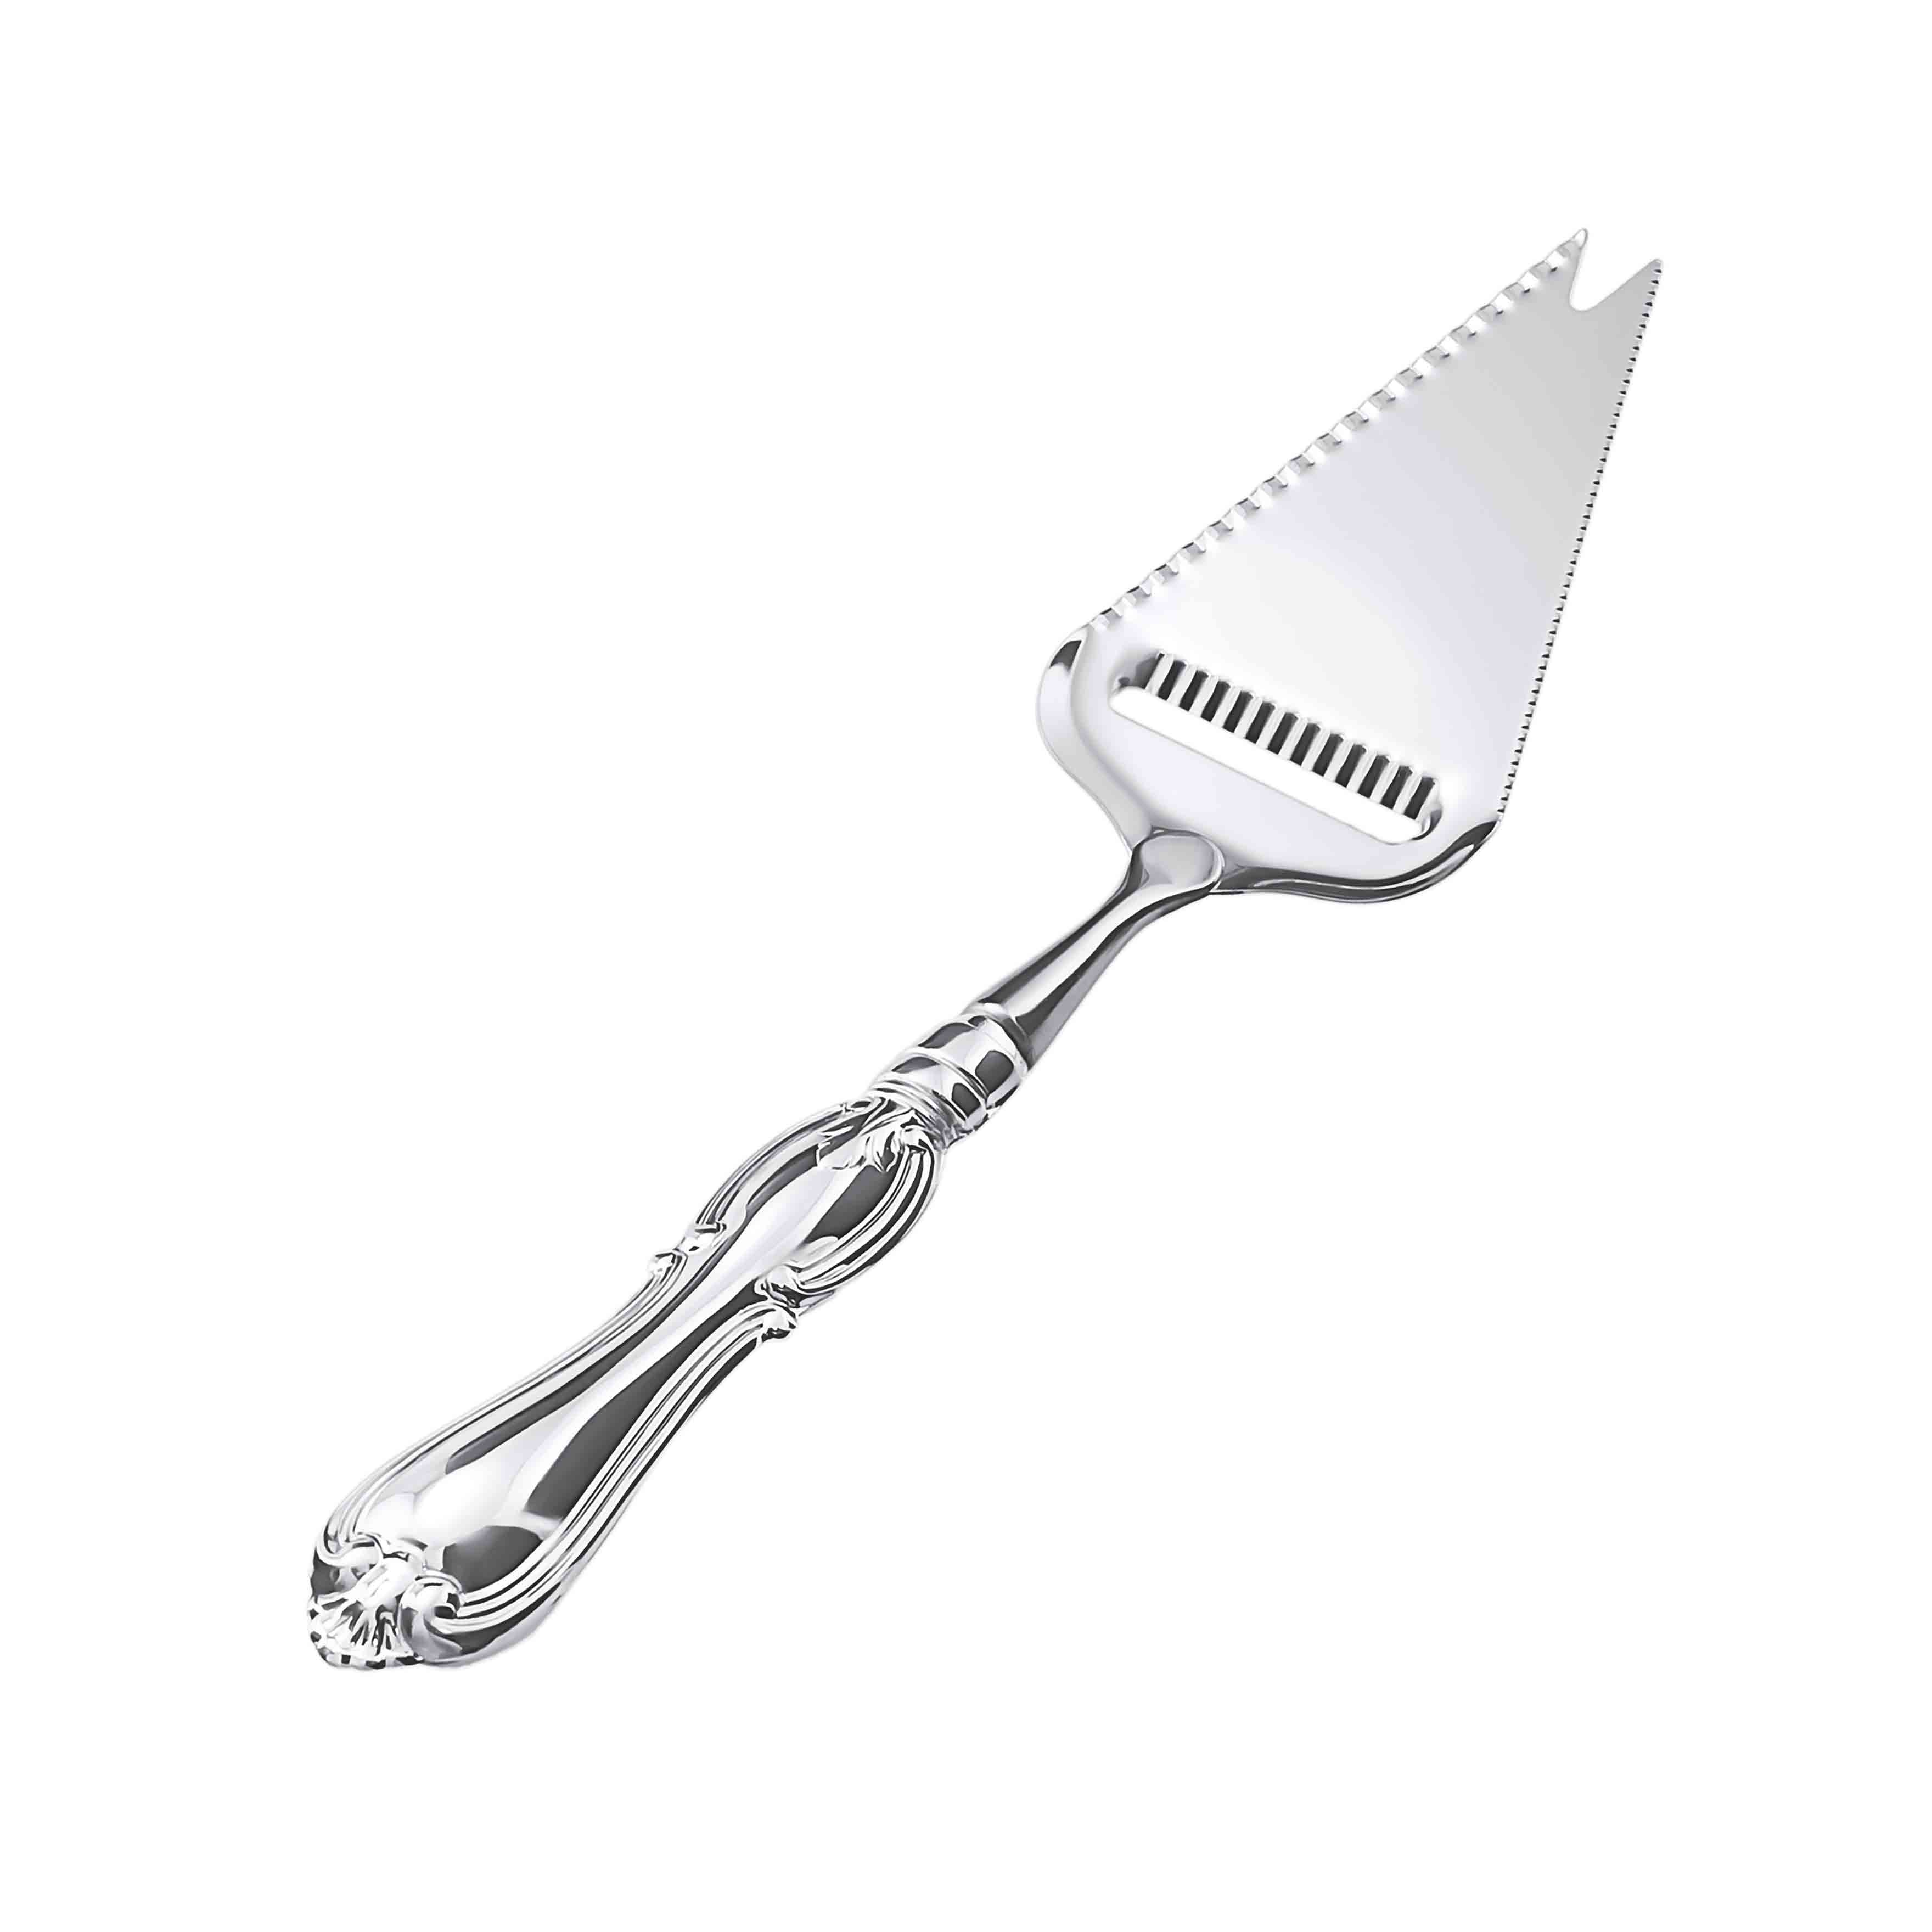 https://www.goldenflamingo.us/media/uploads/product/silver-cheese-cutter-and-slicer_11035212_3520.jpg